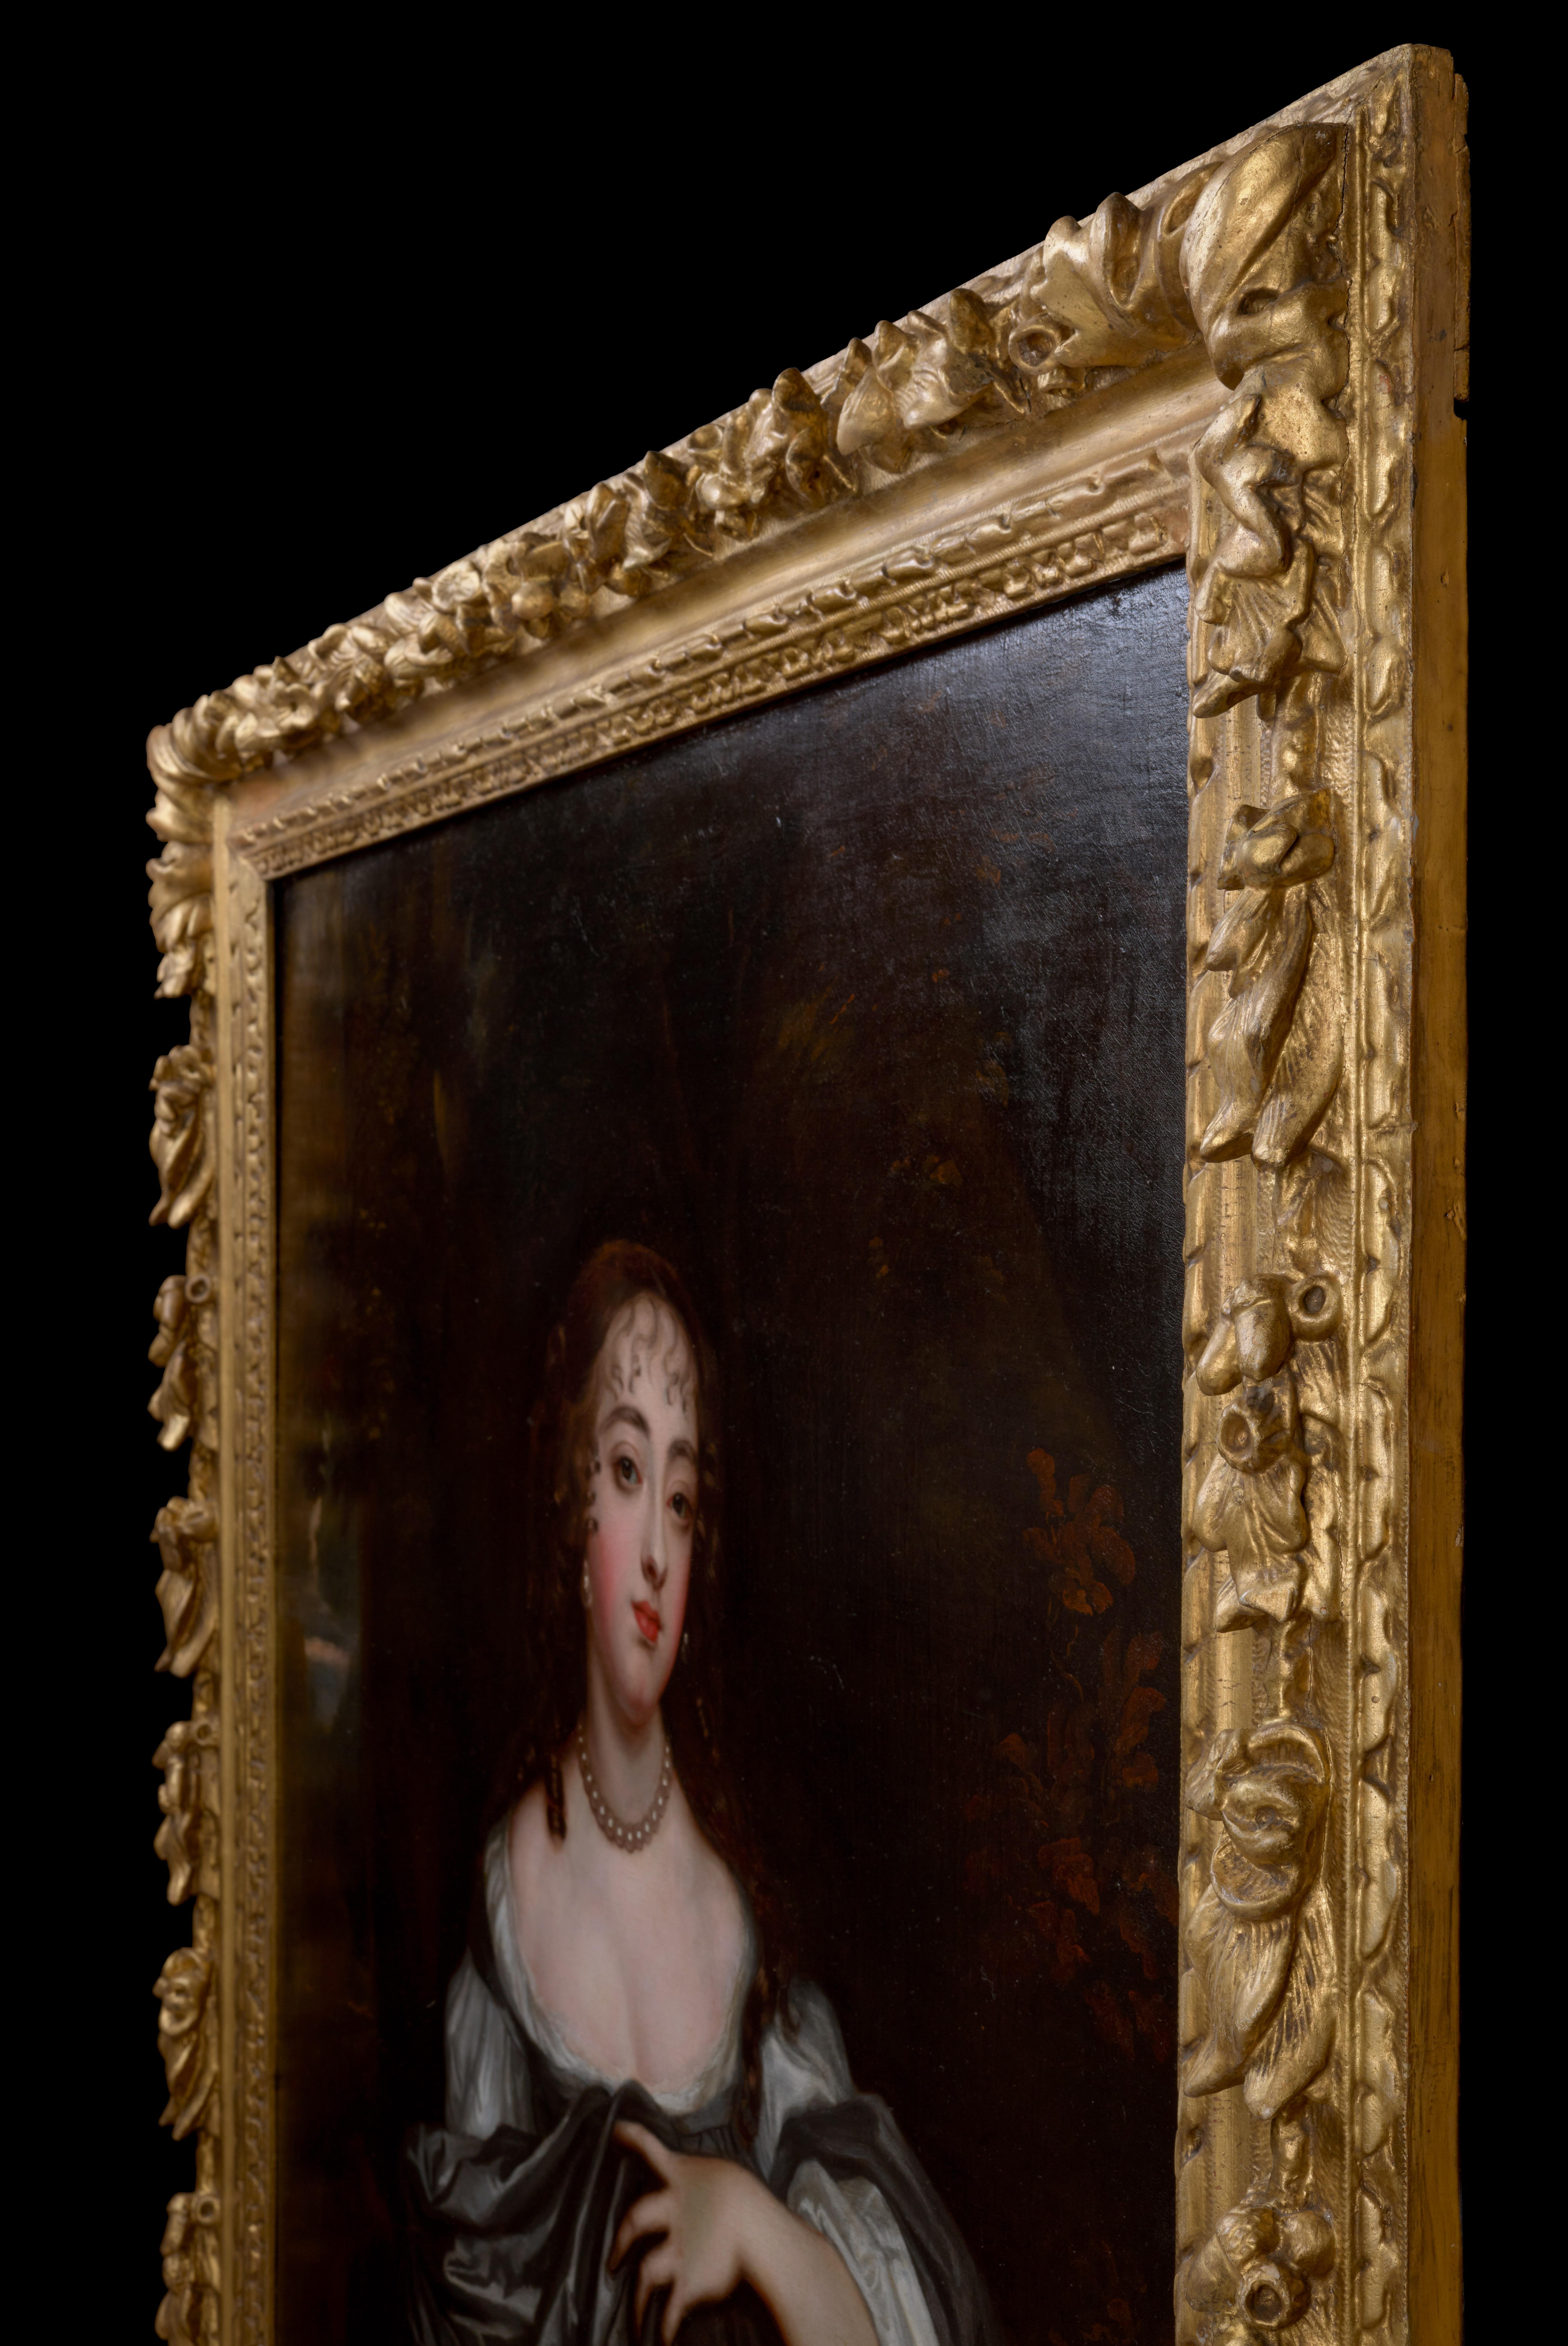 Portrait of Frances Lady Whitmore nee Brooke, Exquisite Carved Frame, Old Master - Old Masters Art by Sir Peter Lely